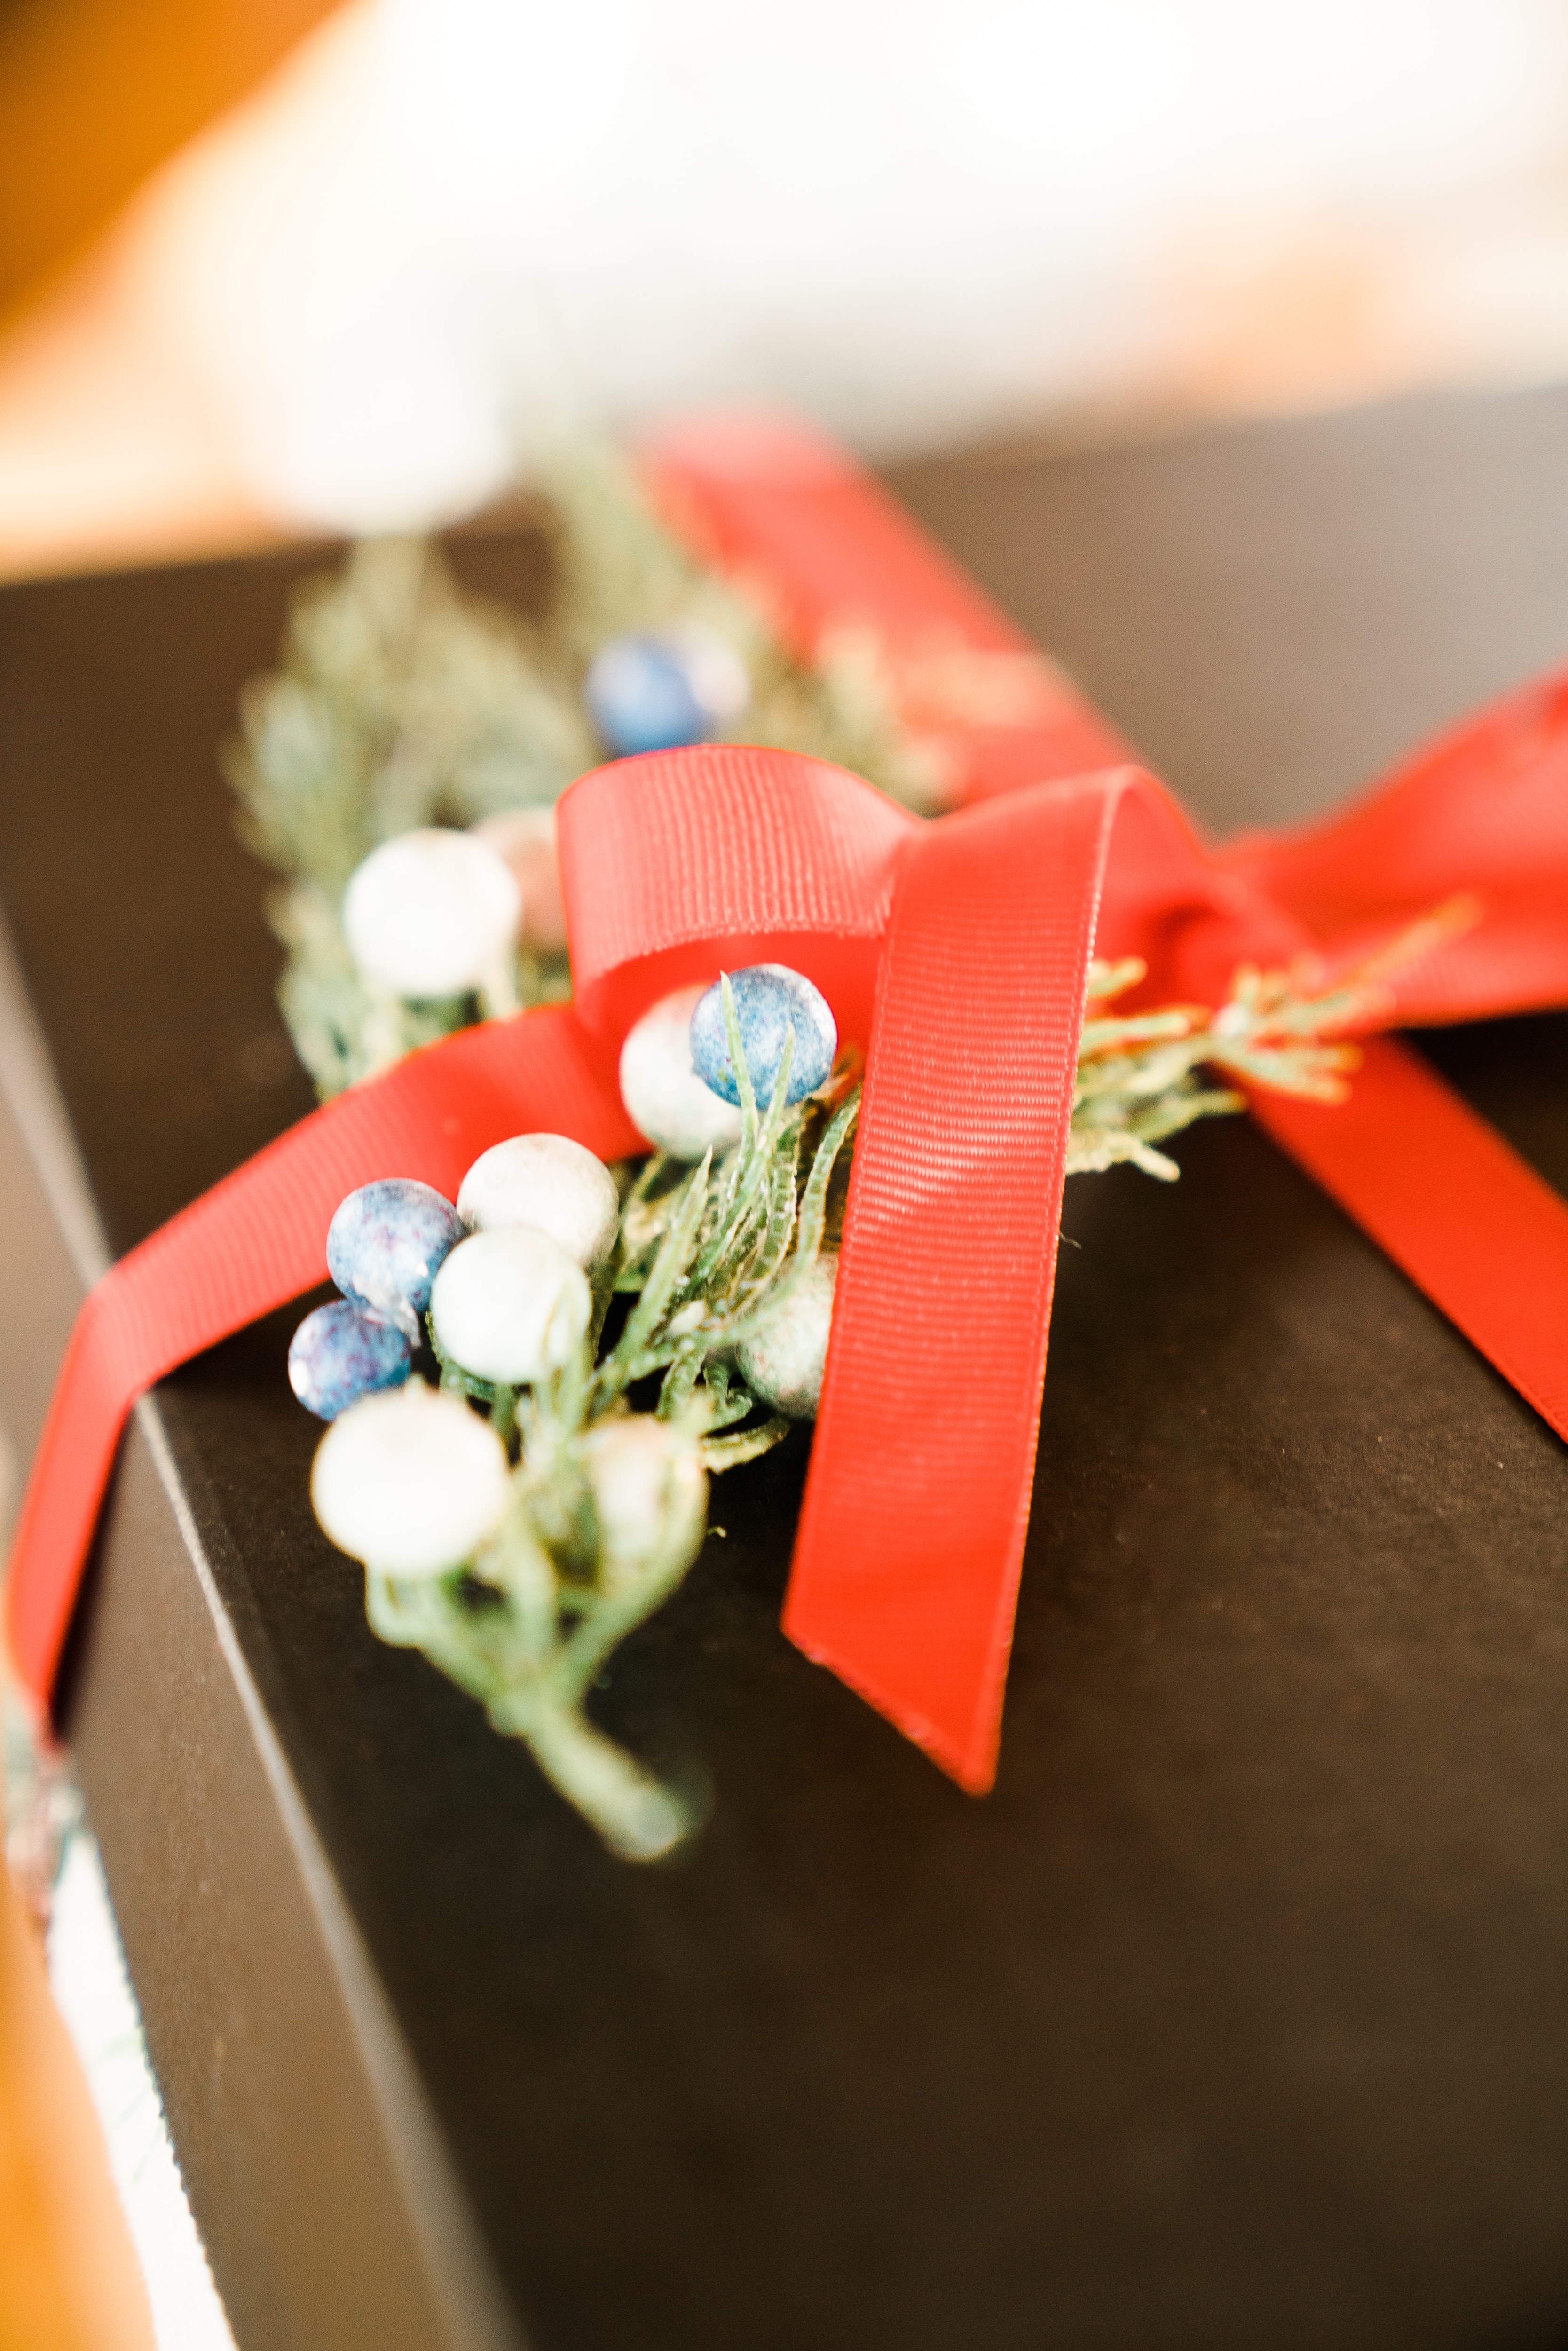 Holiday Gifts for her | David Oliver Gascon on Unsplash